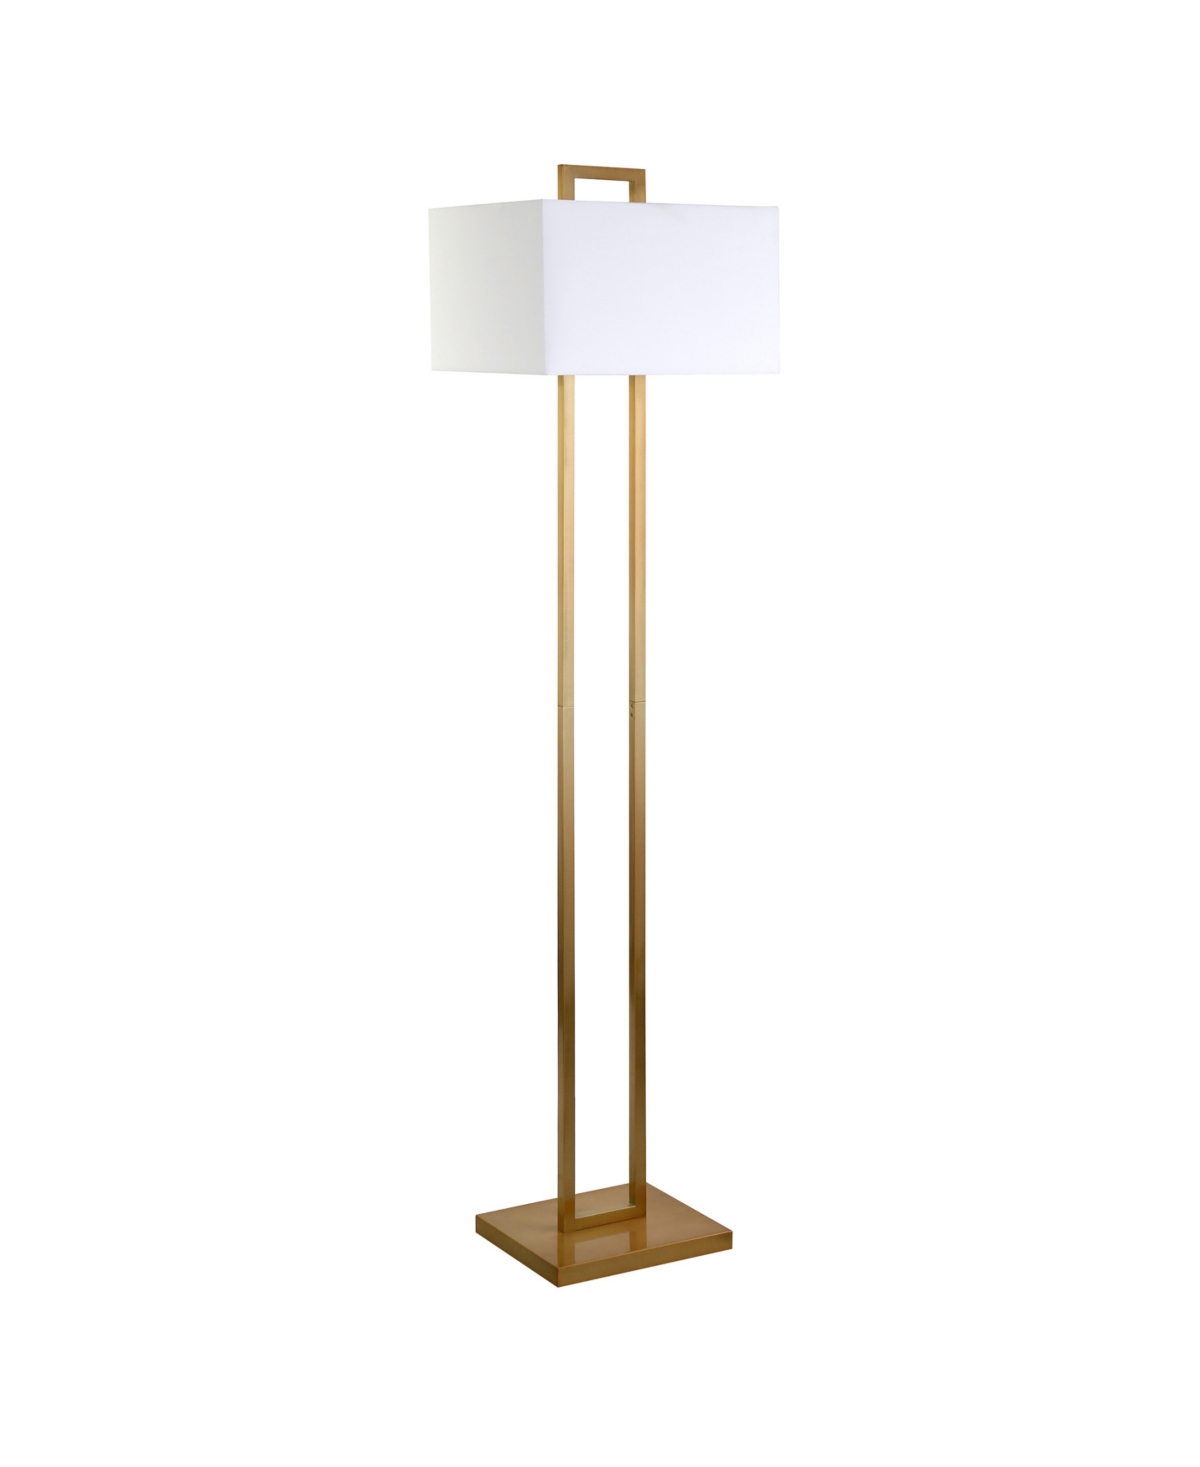 Hudson & Canal Adair 68" Tall Floor Lamp With Fabric Shade In Brushed Nickel